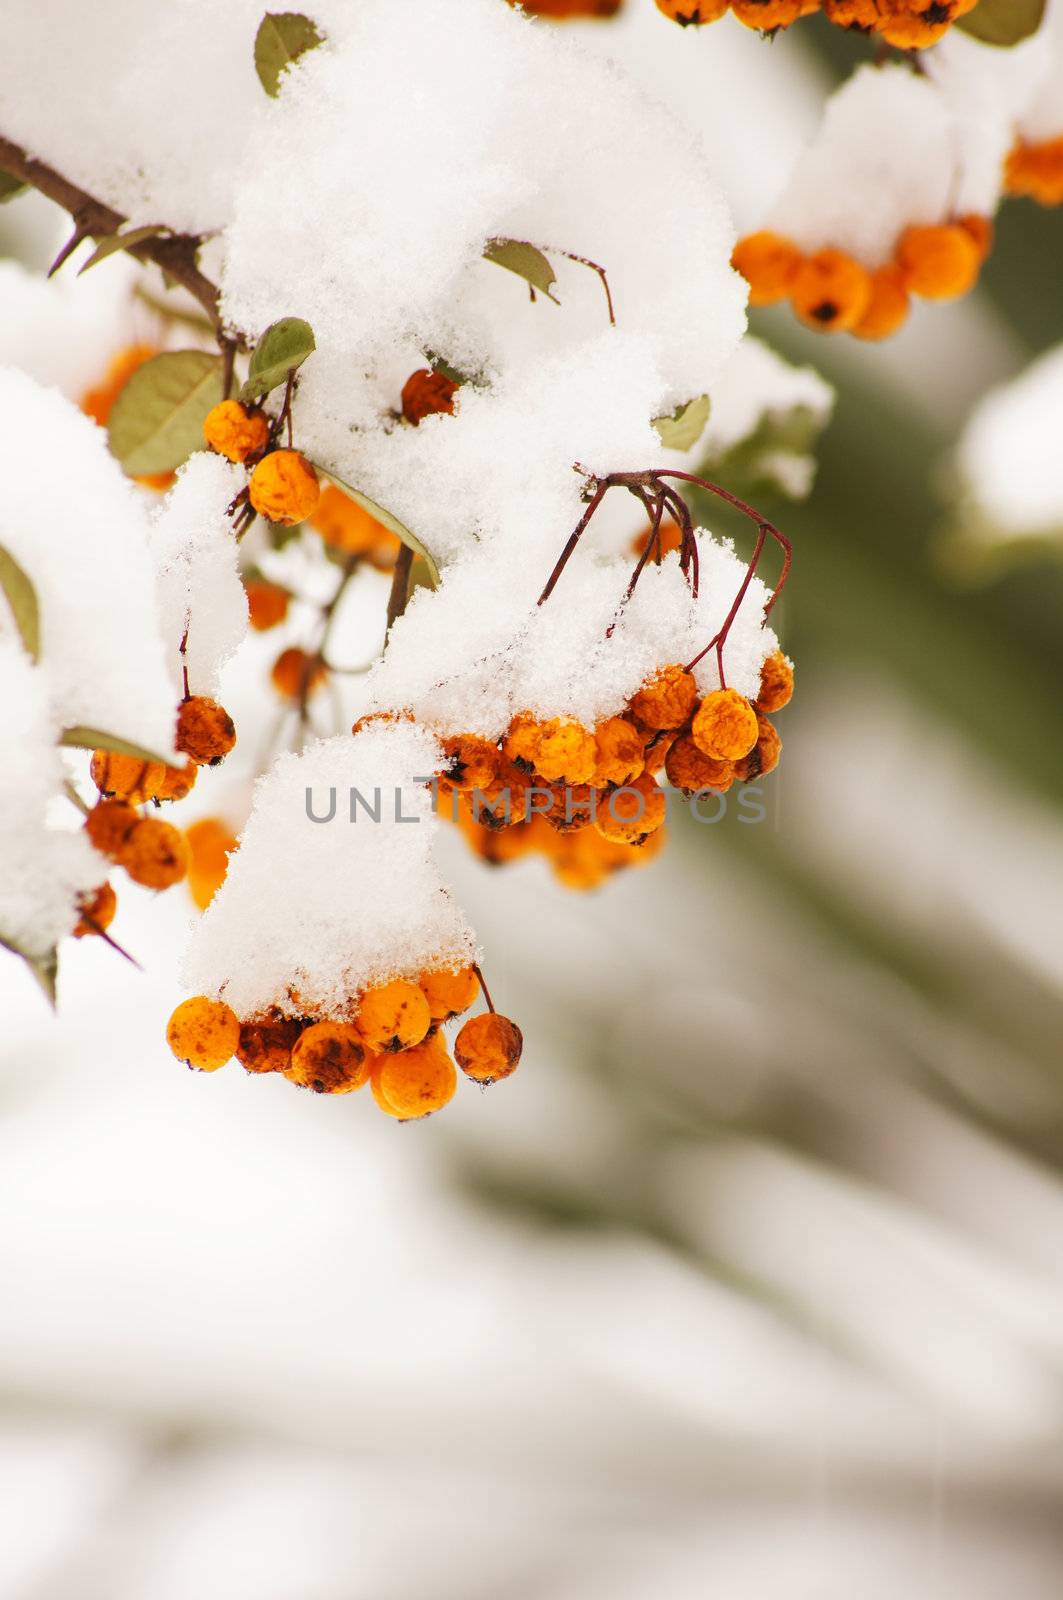 Red guelder-rose under snow and ice